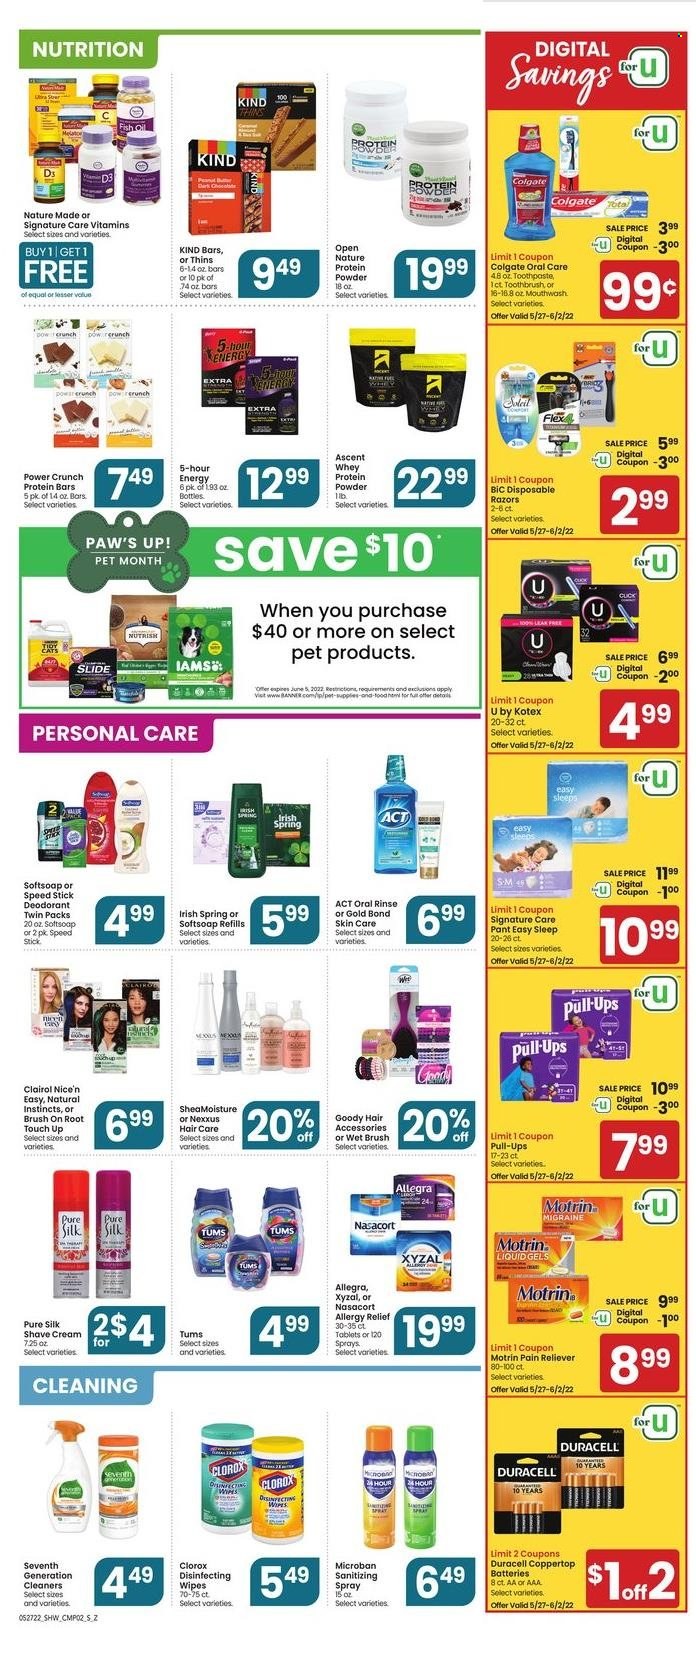 thumbnail - Shaw’s Flyer - 05/27/2022 - 06/02/2022 - Sales products - chocolate, dark chocolate, Thins, protein bar, oil, peanut butter, wipes, Clorox, Softsoap, Colgate, toothbrush, toothpaste, mouthwash, Kotex, Clairol, Nexxus, anti-perspirant, Speed Stick, deodorant, BIC, shave cream, disposable razor, battery, Duracell, Iams, Nutrish, fish oil, Nature Made, whey protein, allergy relief, Motrin. Page 6.